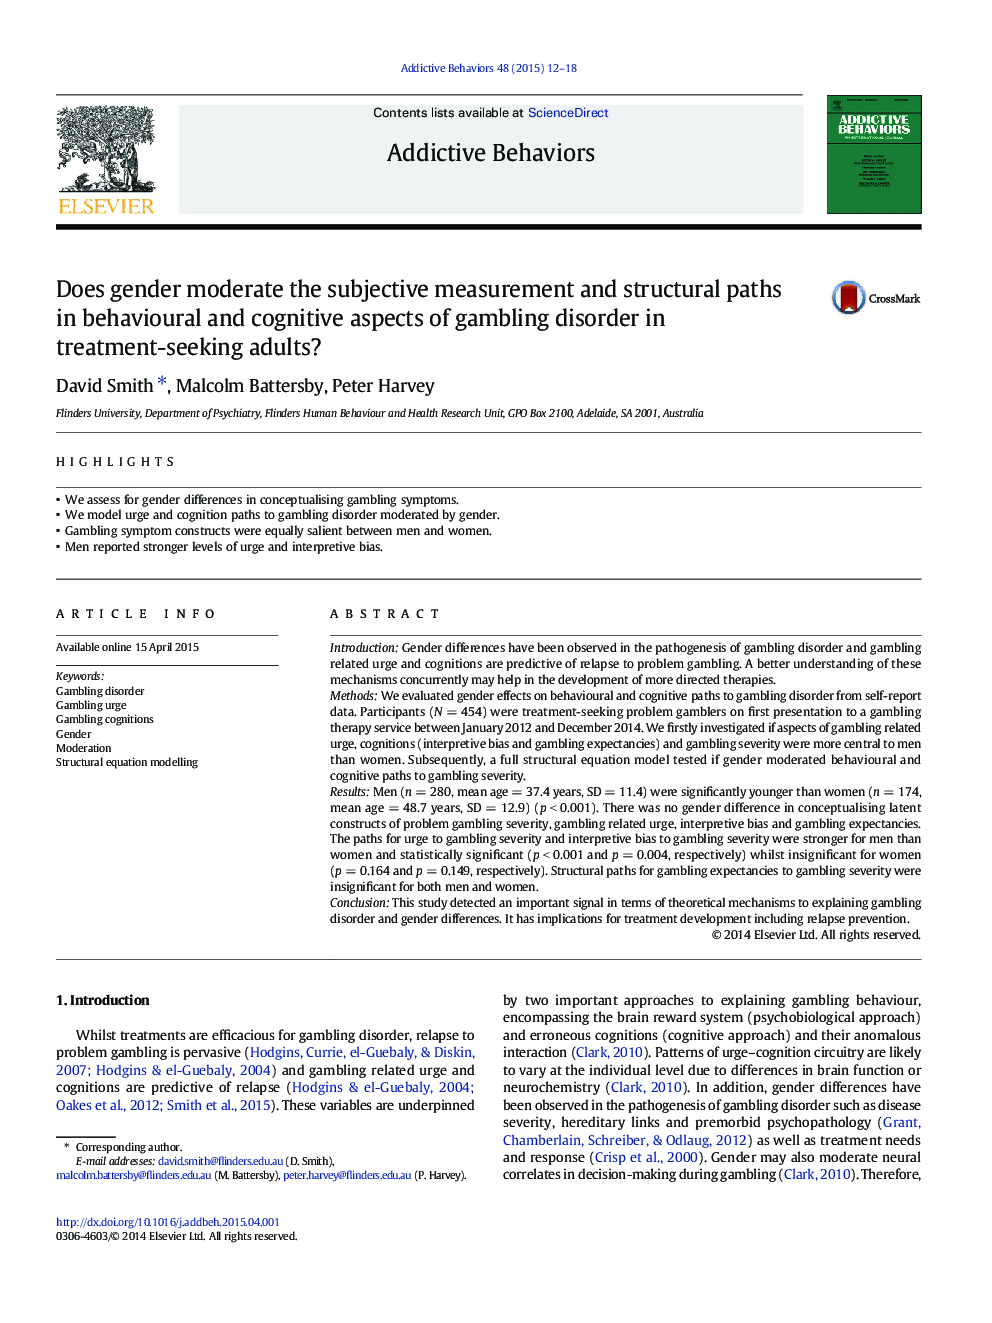 Does gender moderate the subjective measurement and structural paths in behavioural and cognitive aspects of gambling disorder in treatment-seeking adults?